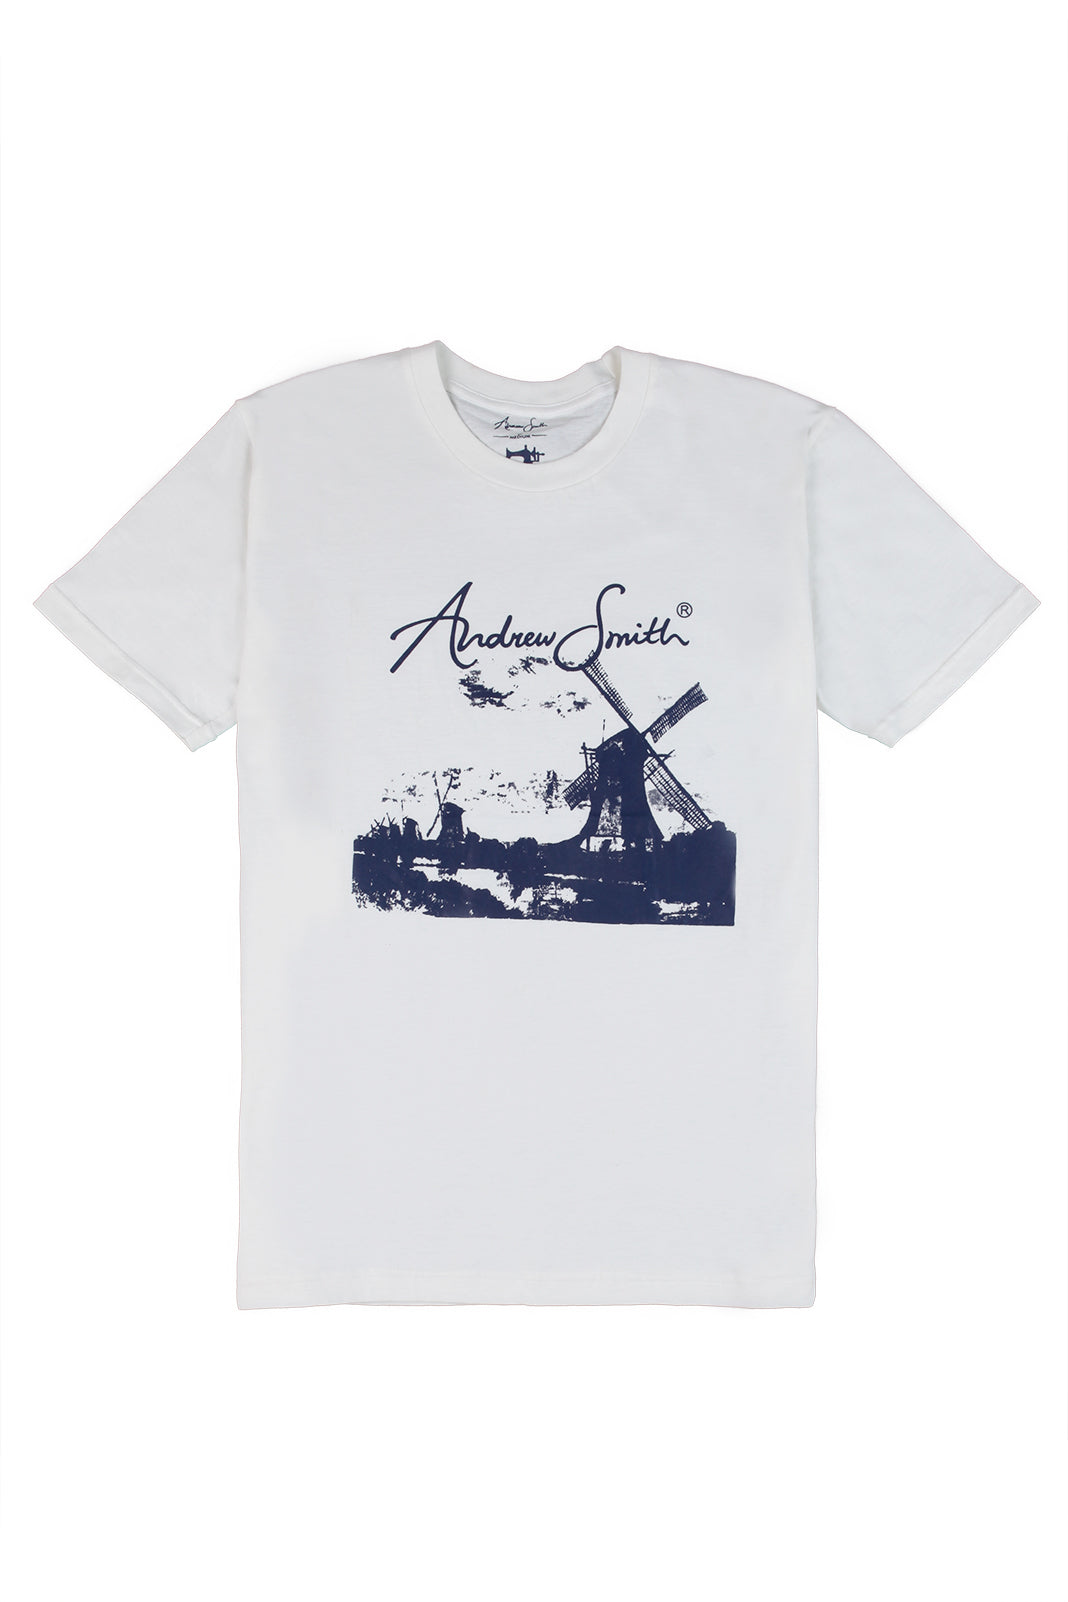 Andrew Smith T-Shirt Slim Fit Pria A0105X08A